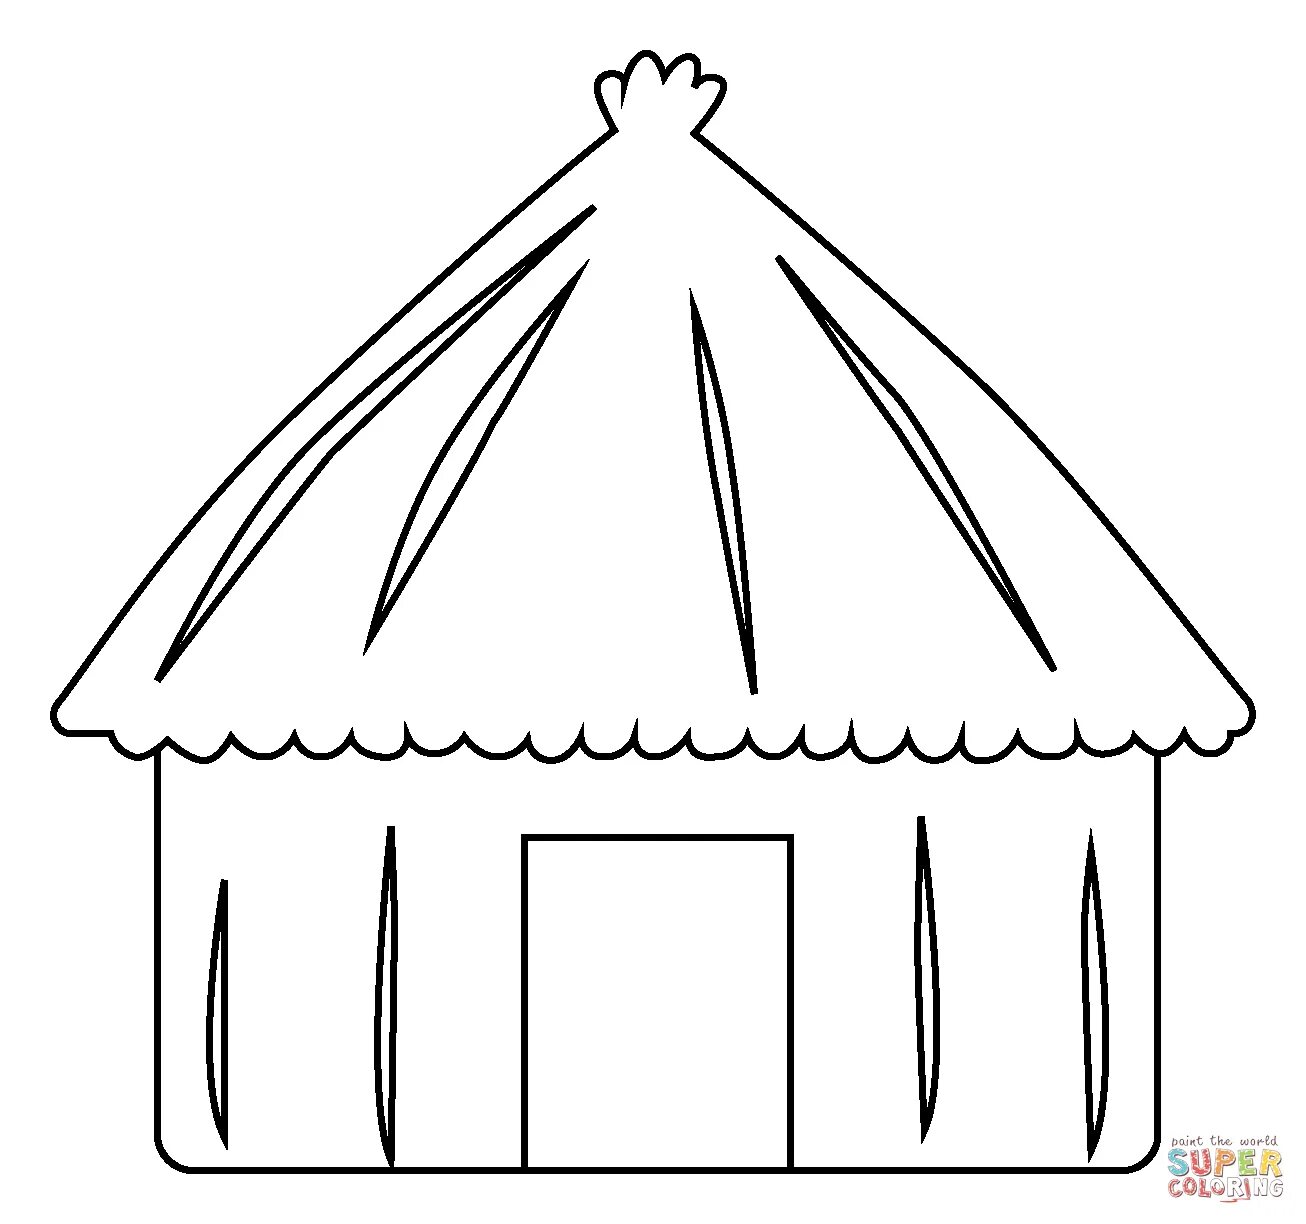 Coloring page dazzling hut for kids